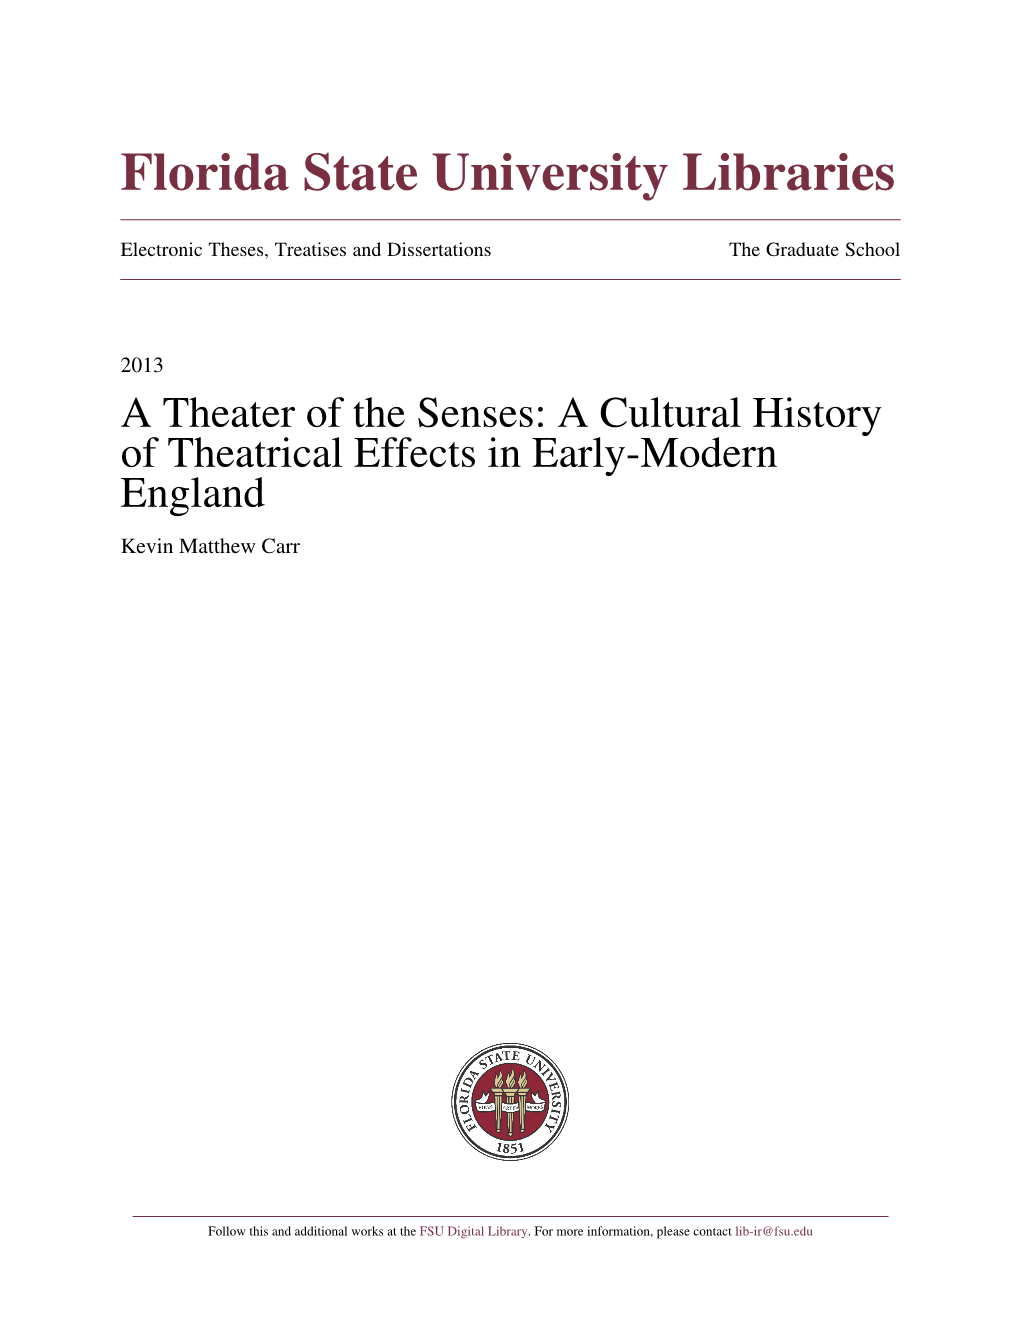 A Theater of the Senses: a Cultural History of Theatrical Effects in Early Modern England